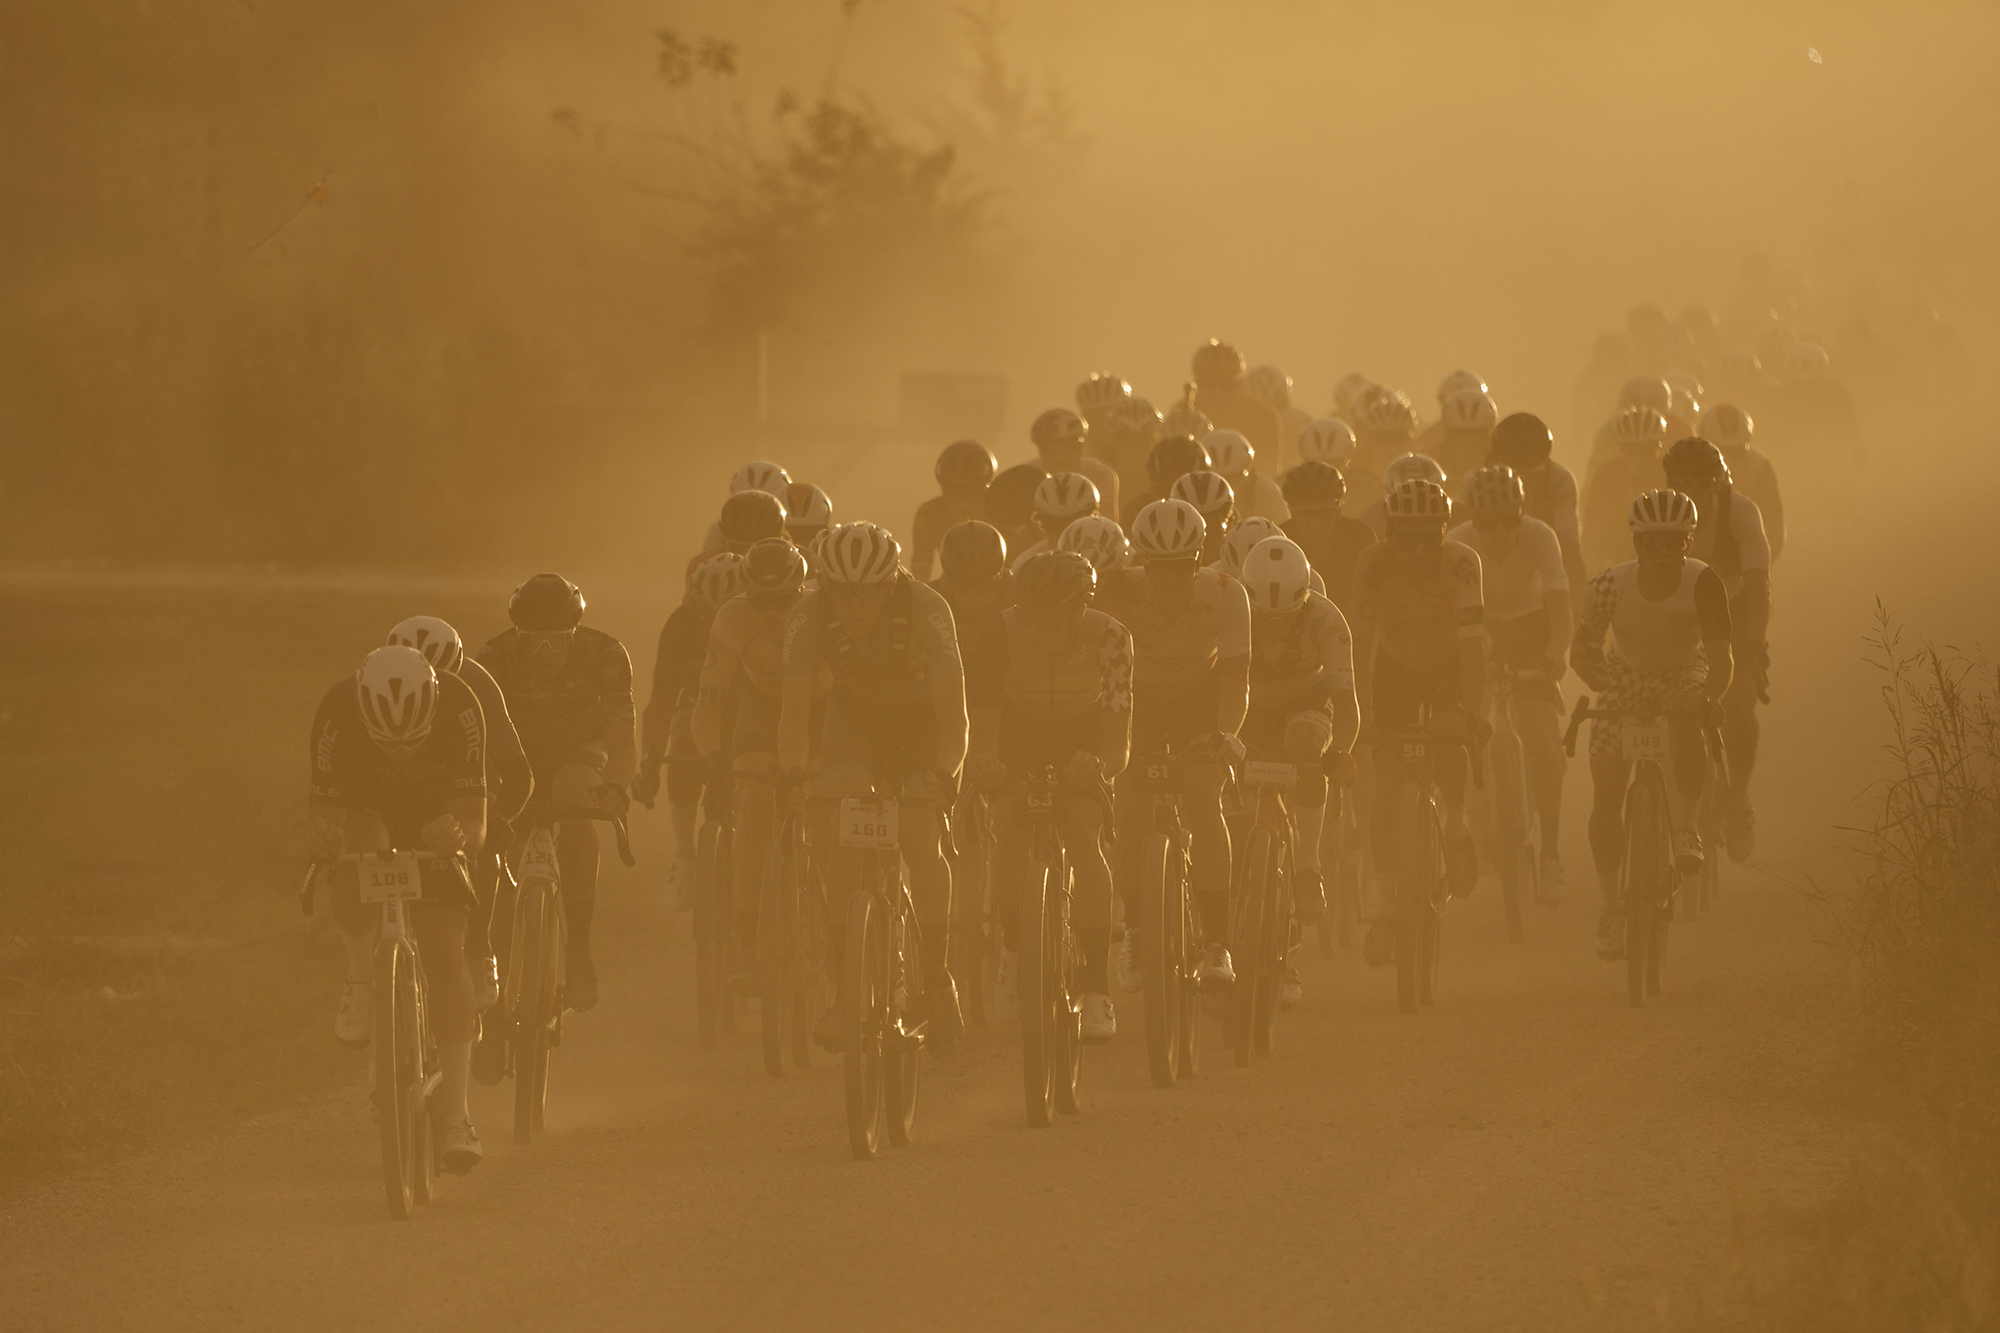 Riders plow on through dust clouds.